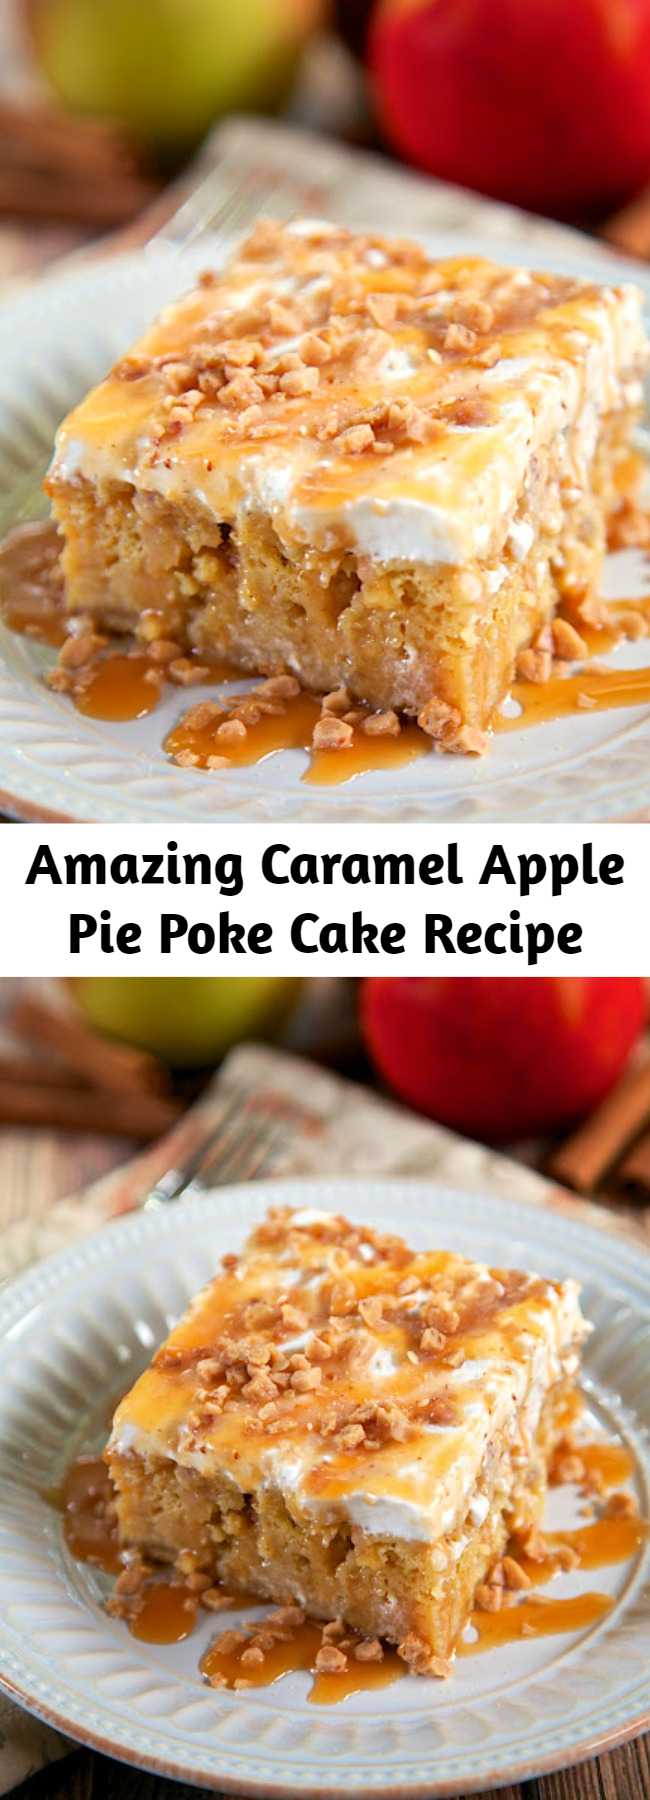 Amazing Caramel Apple Pie Poke Cake Recipe - Apple cake soaked in caramel sauce topped with cool whip and toffee bits – AMAZING! Can make ahead of time and refrigerate. It gets better as it sits in the fridge. Super delicious cake!